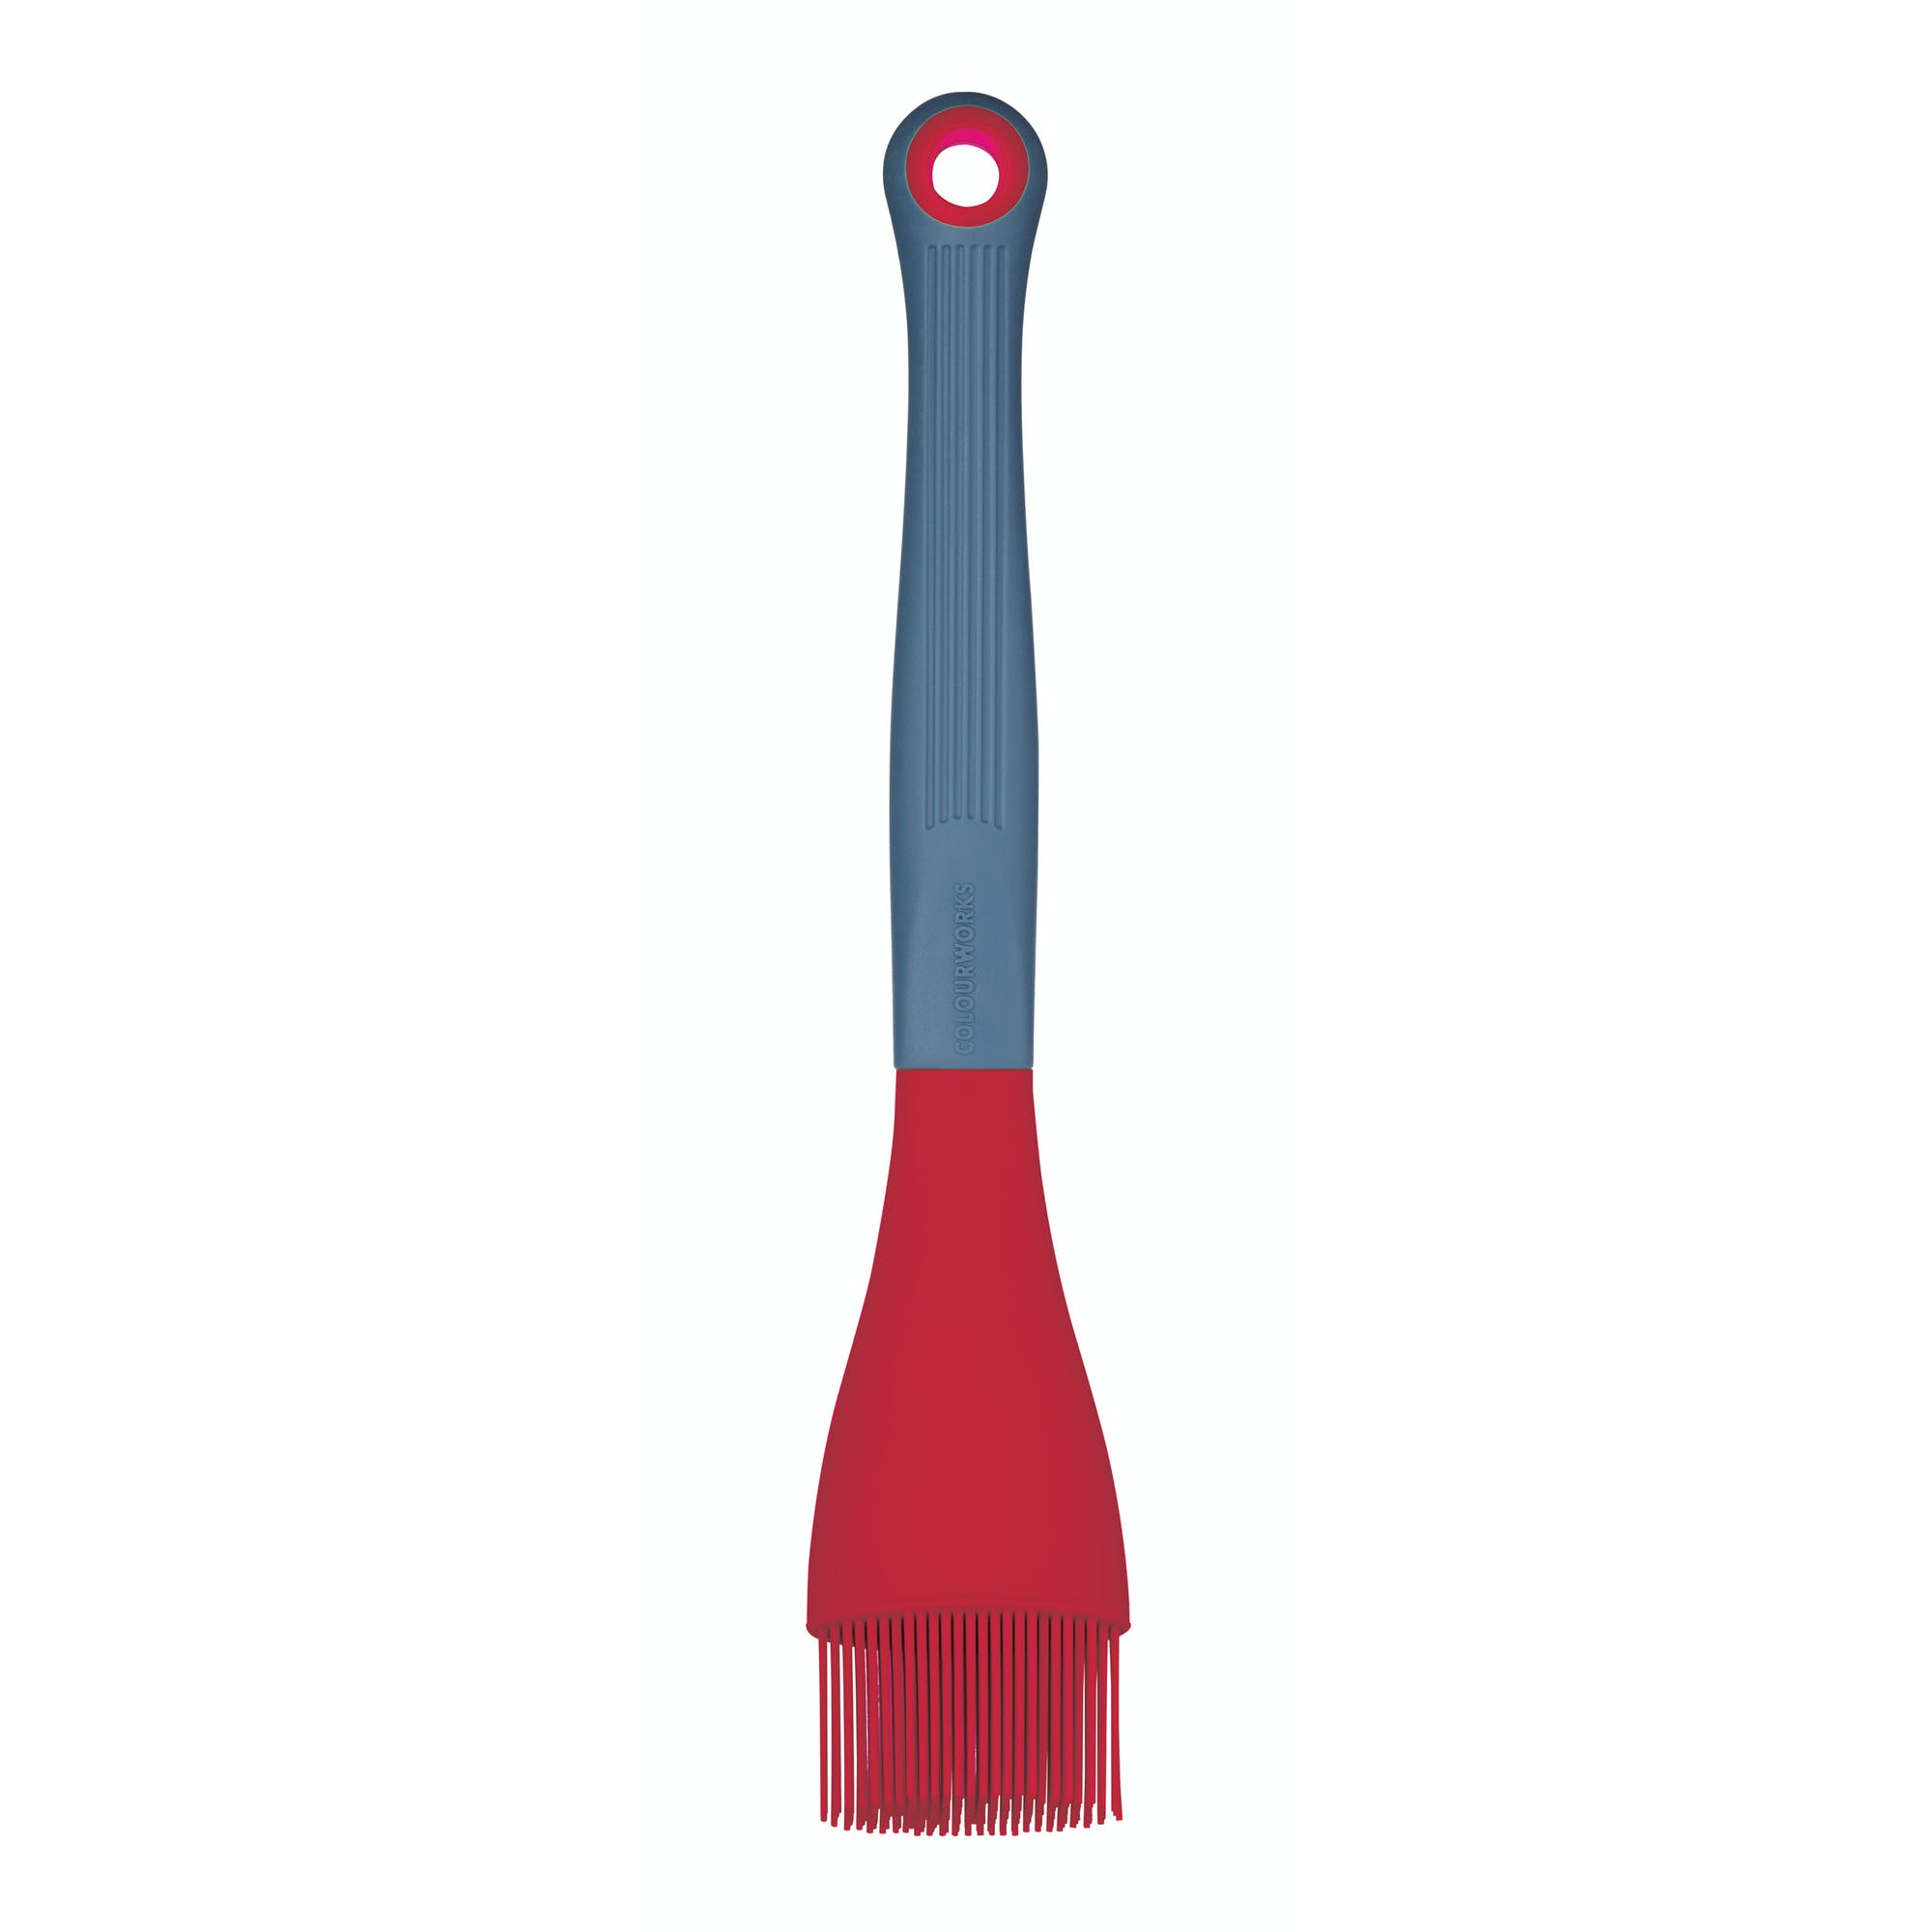 Colourworks Brights Red Silicone-Headed Angled Pastry / Basting Brush - The Cooks Cupboard Ltd